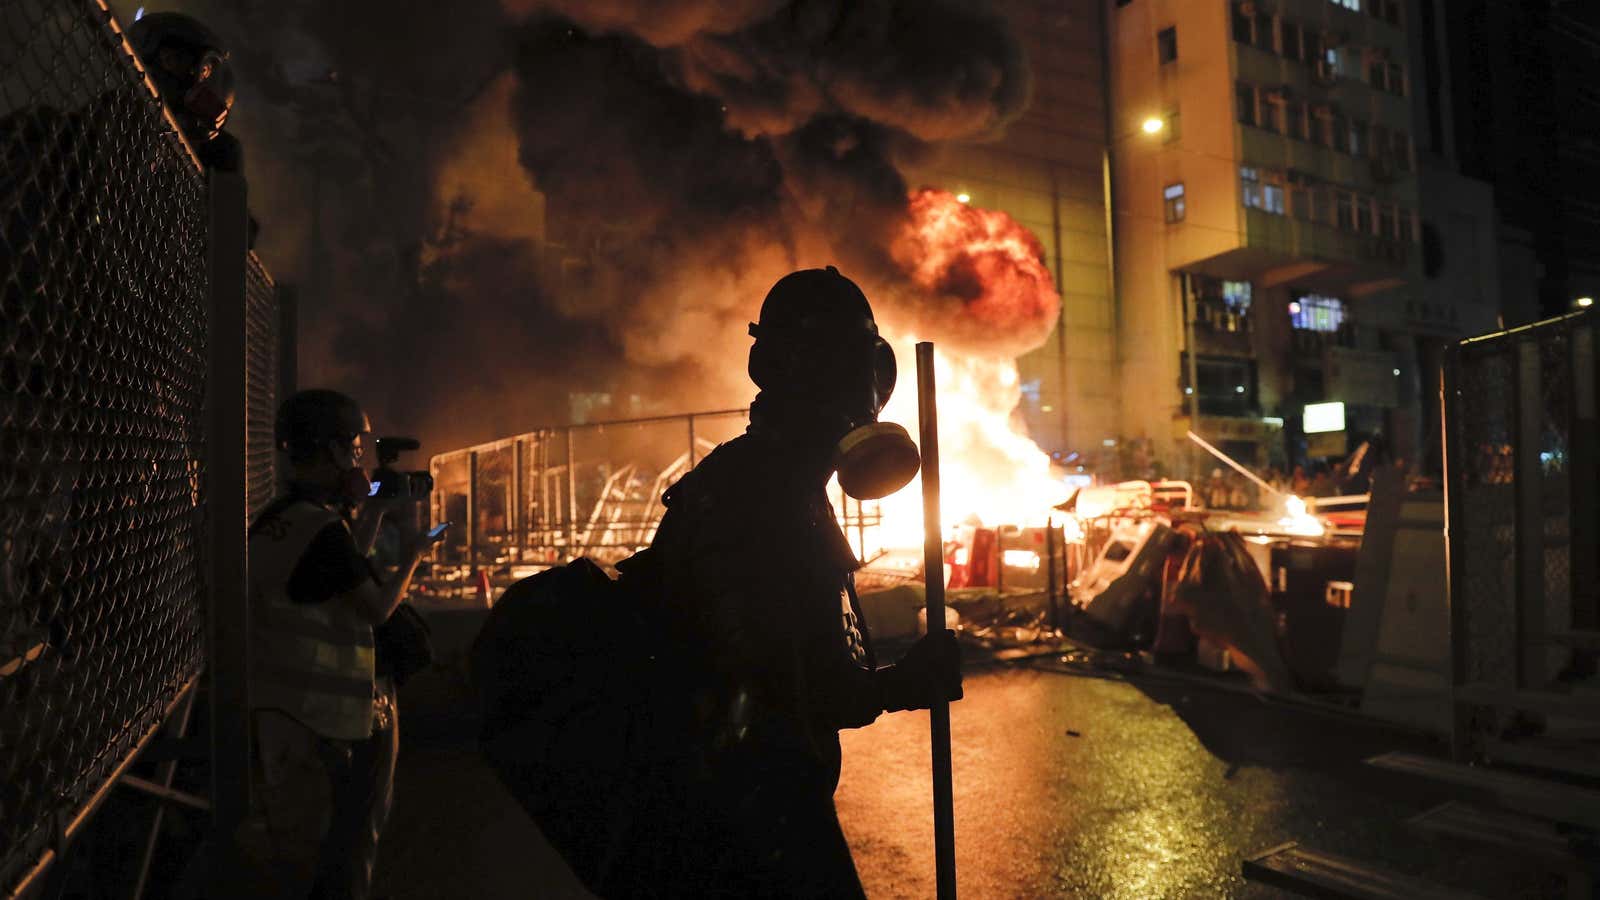 A fire set by protesters burns in Wan Chai during a pro-democracy protest.